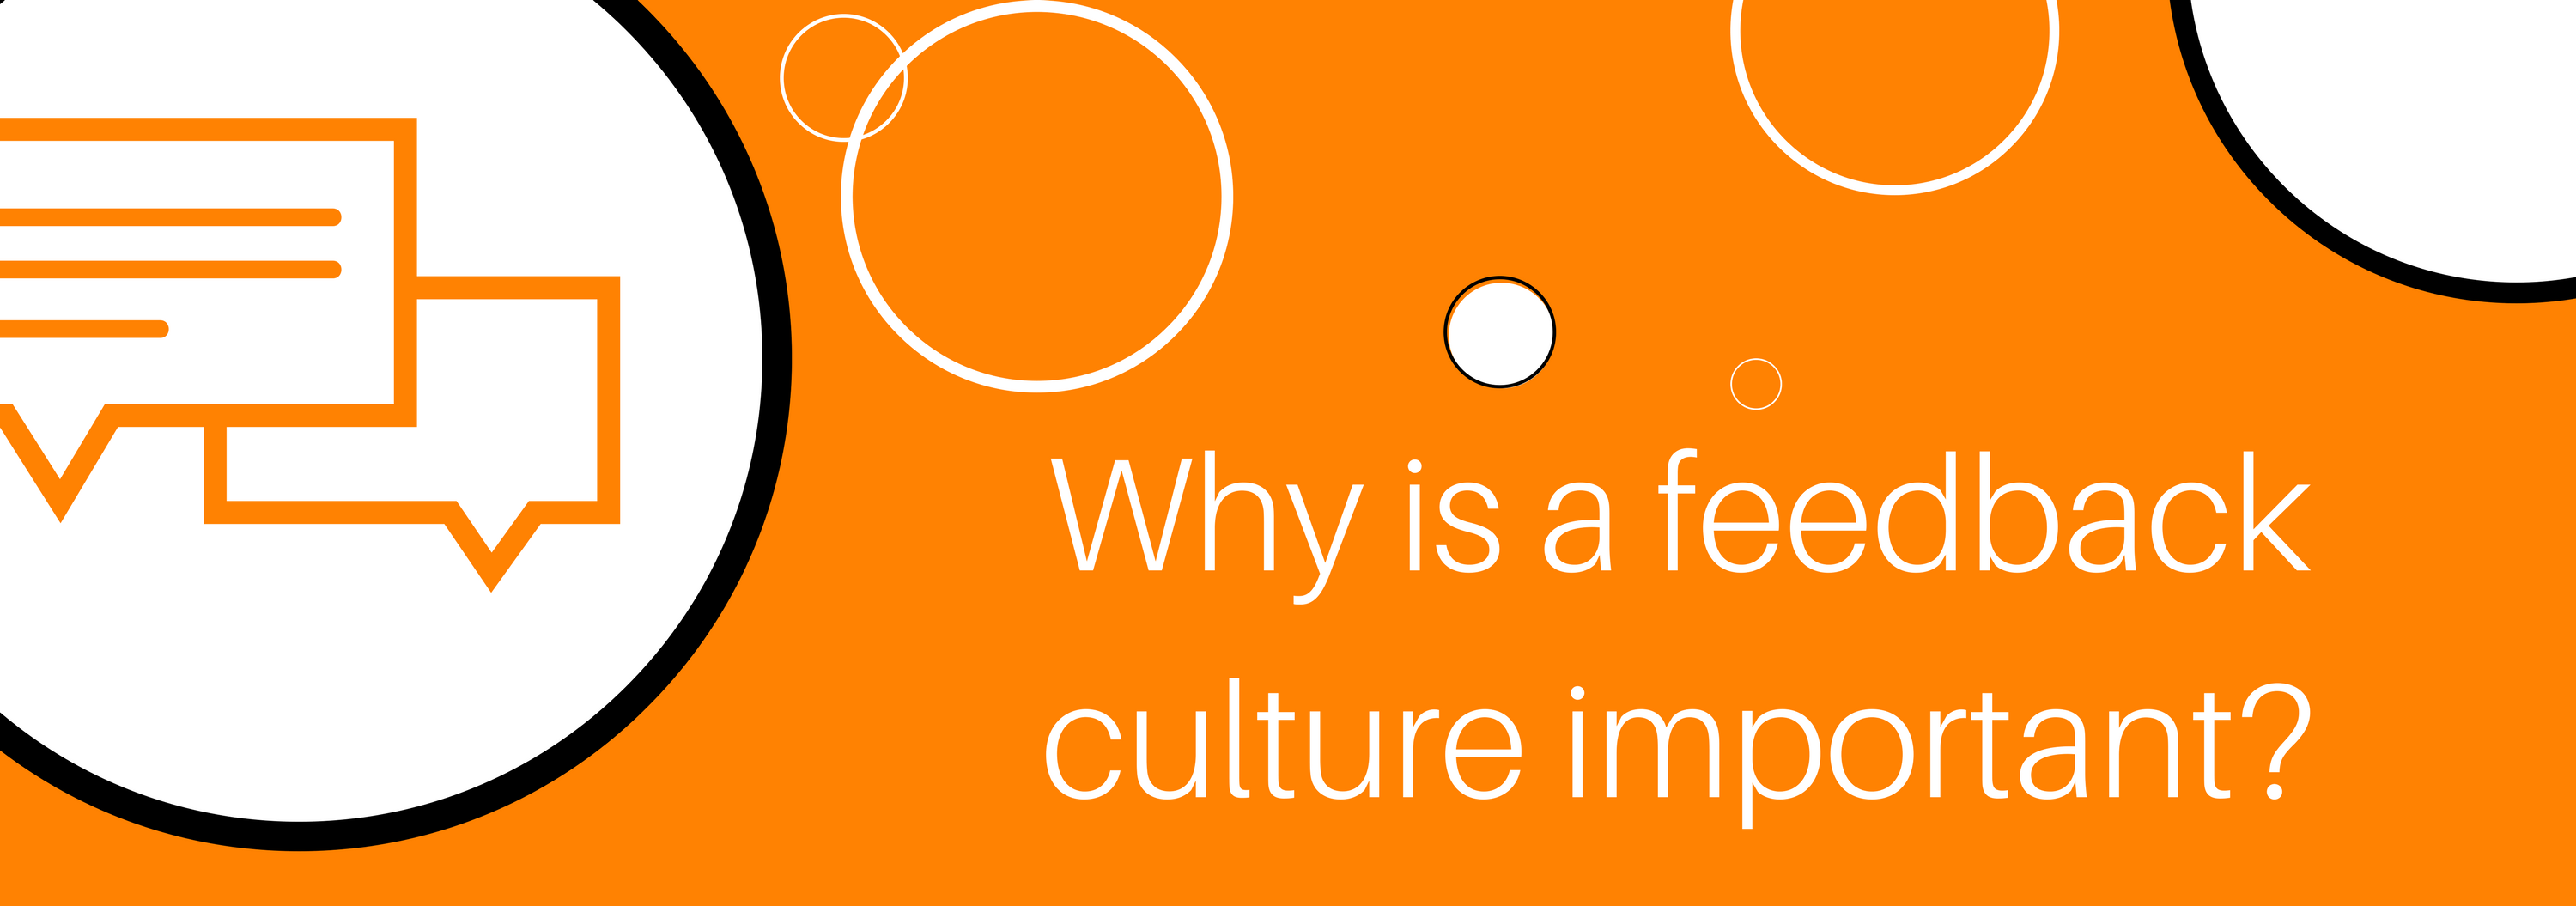 Why is a feedback culture important? 